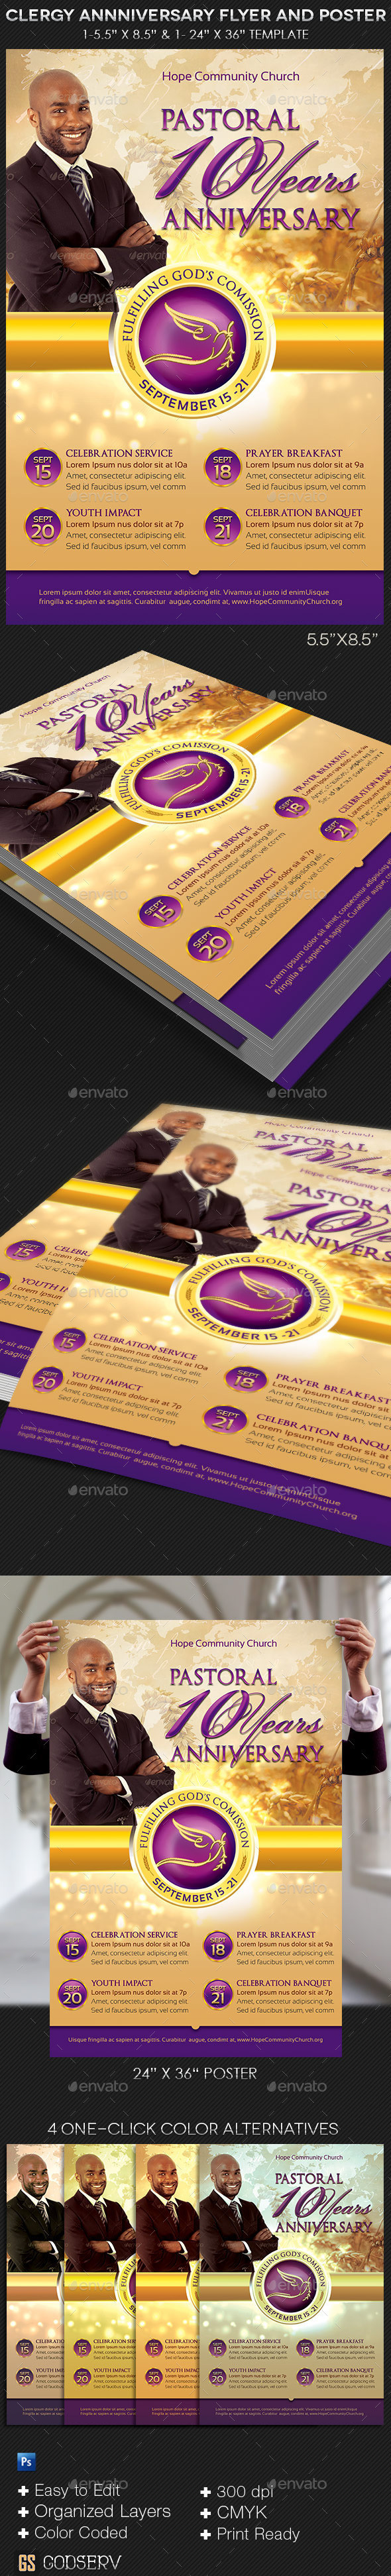 Clergy anniversary flyer and poster template preview